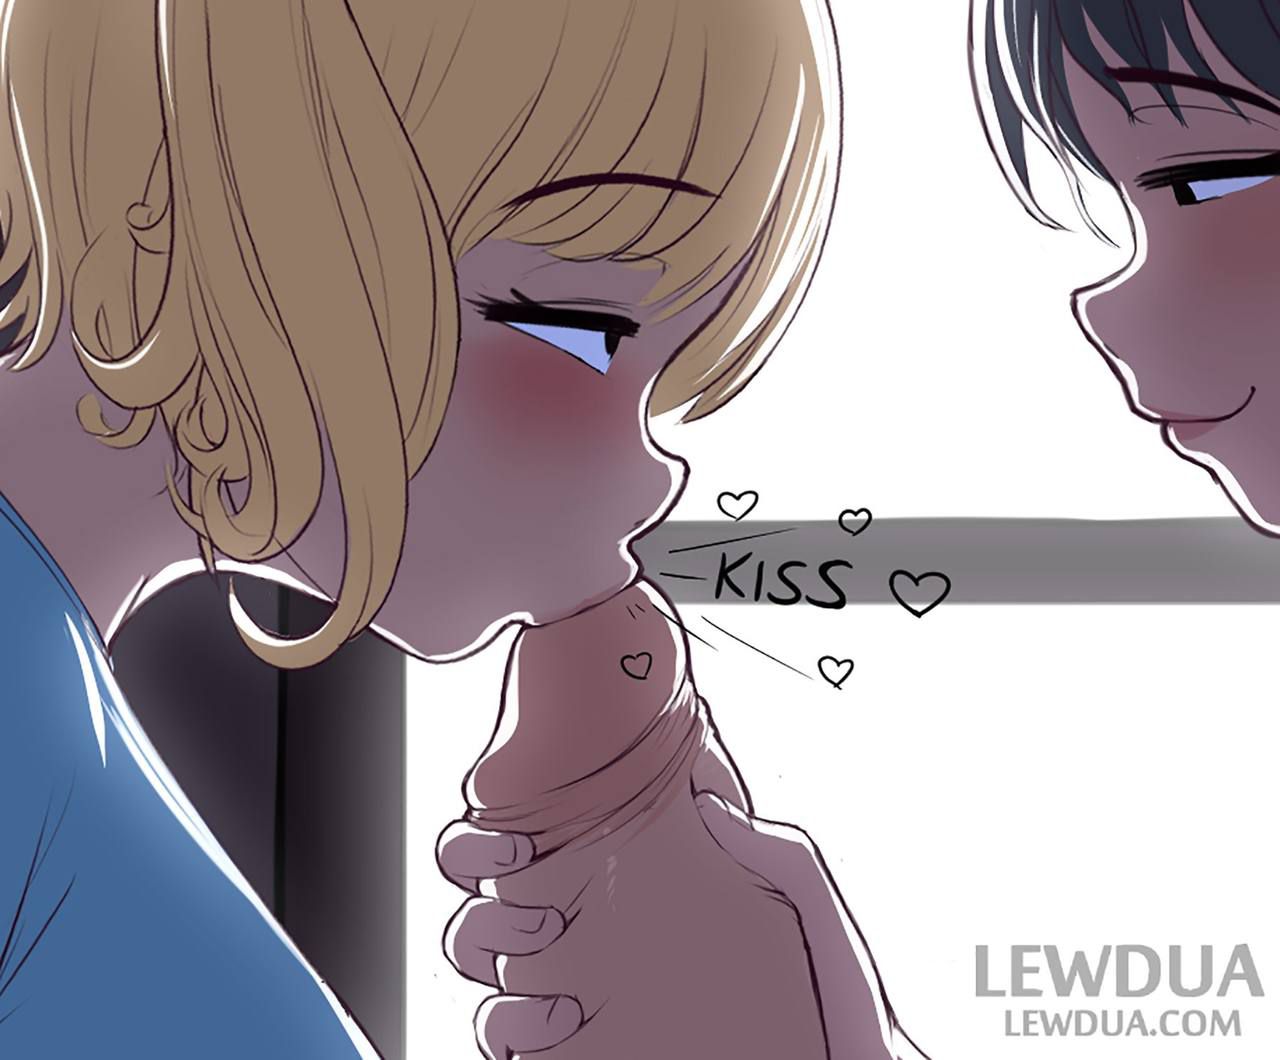 [Lewdua] Love is Sharing - Nessie and Alison 7